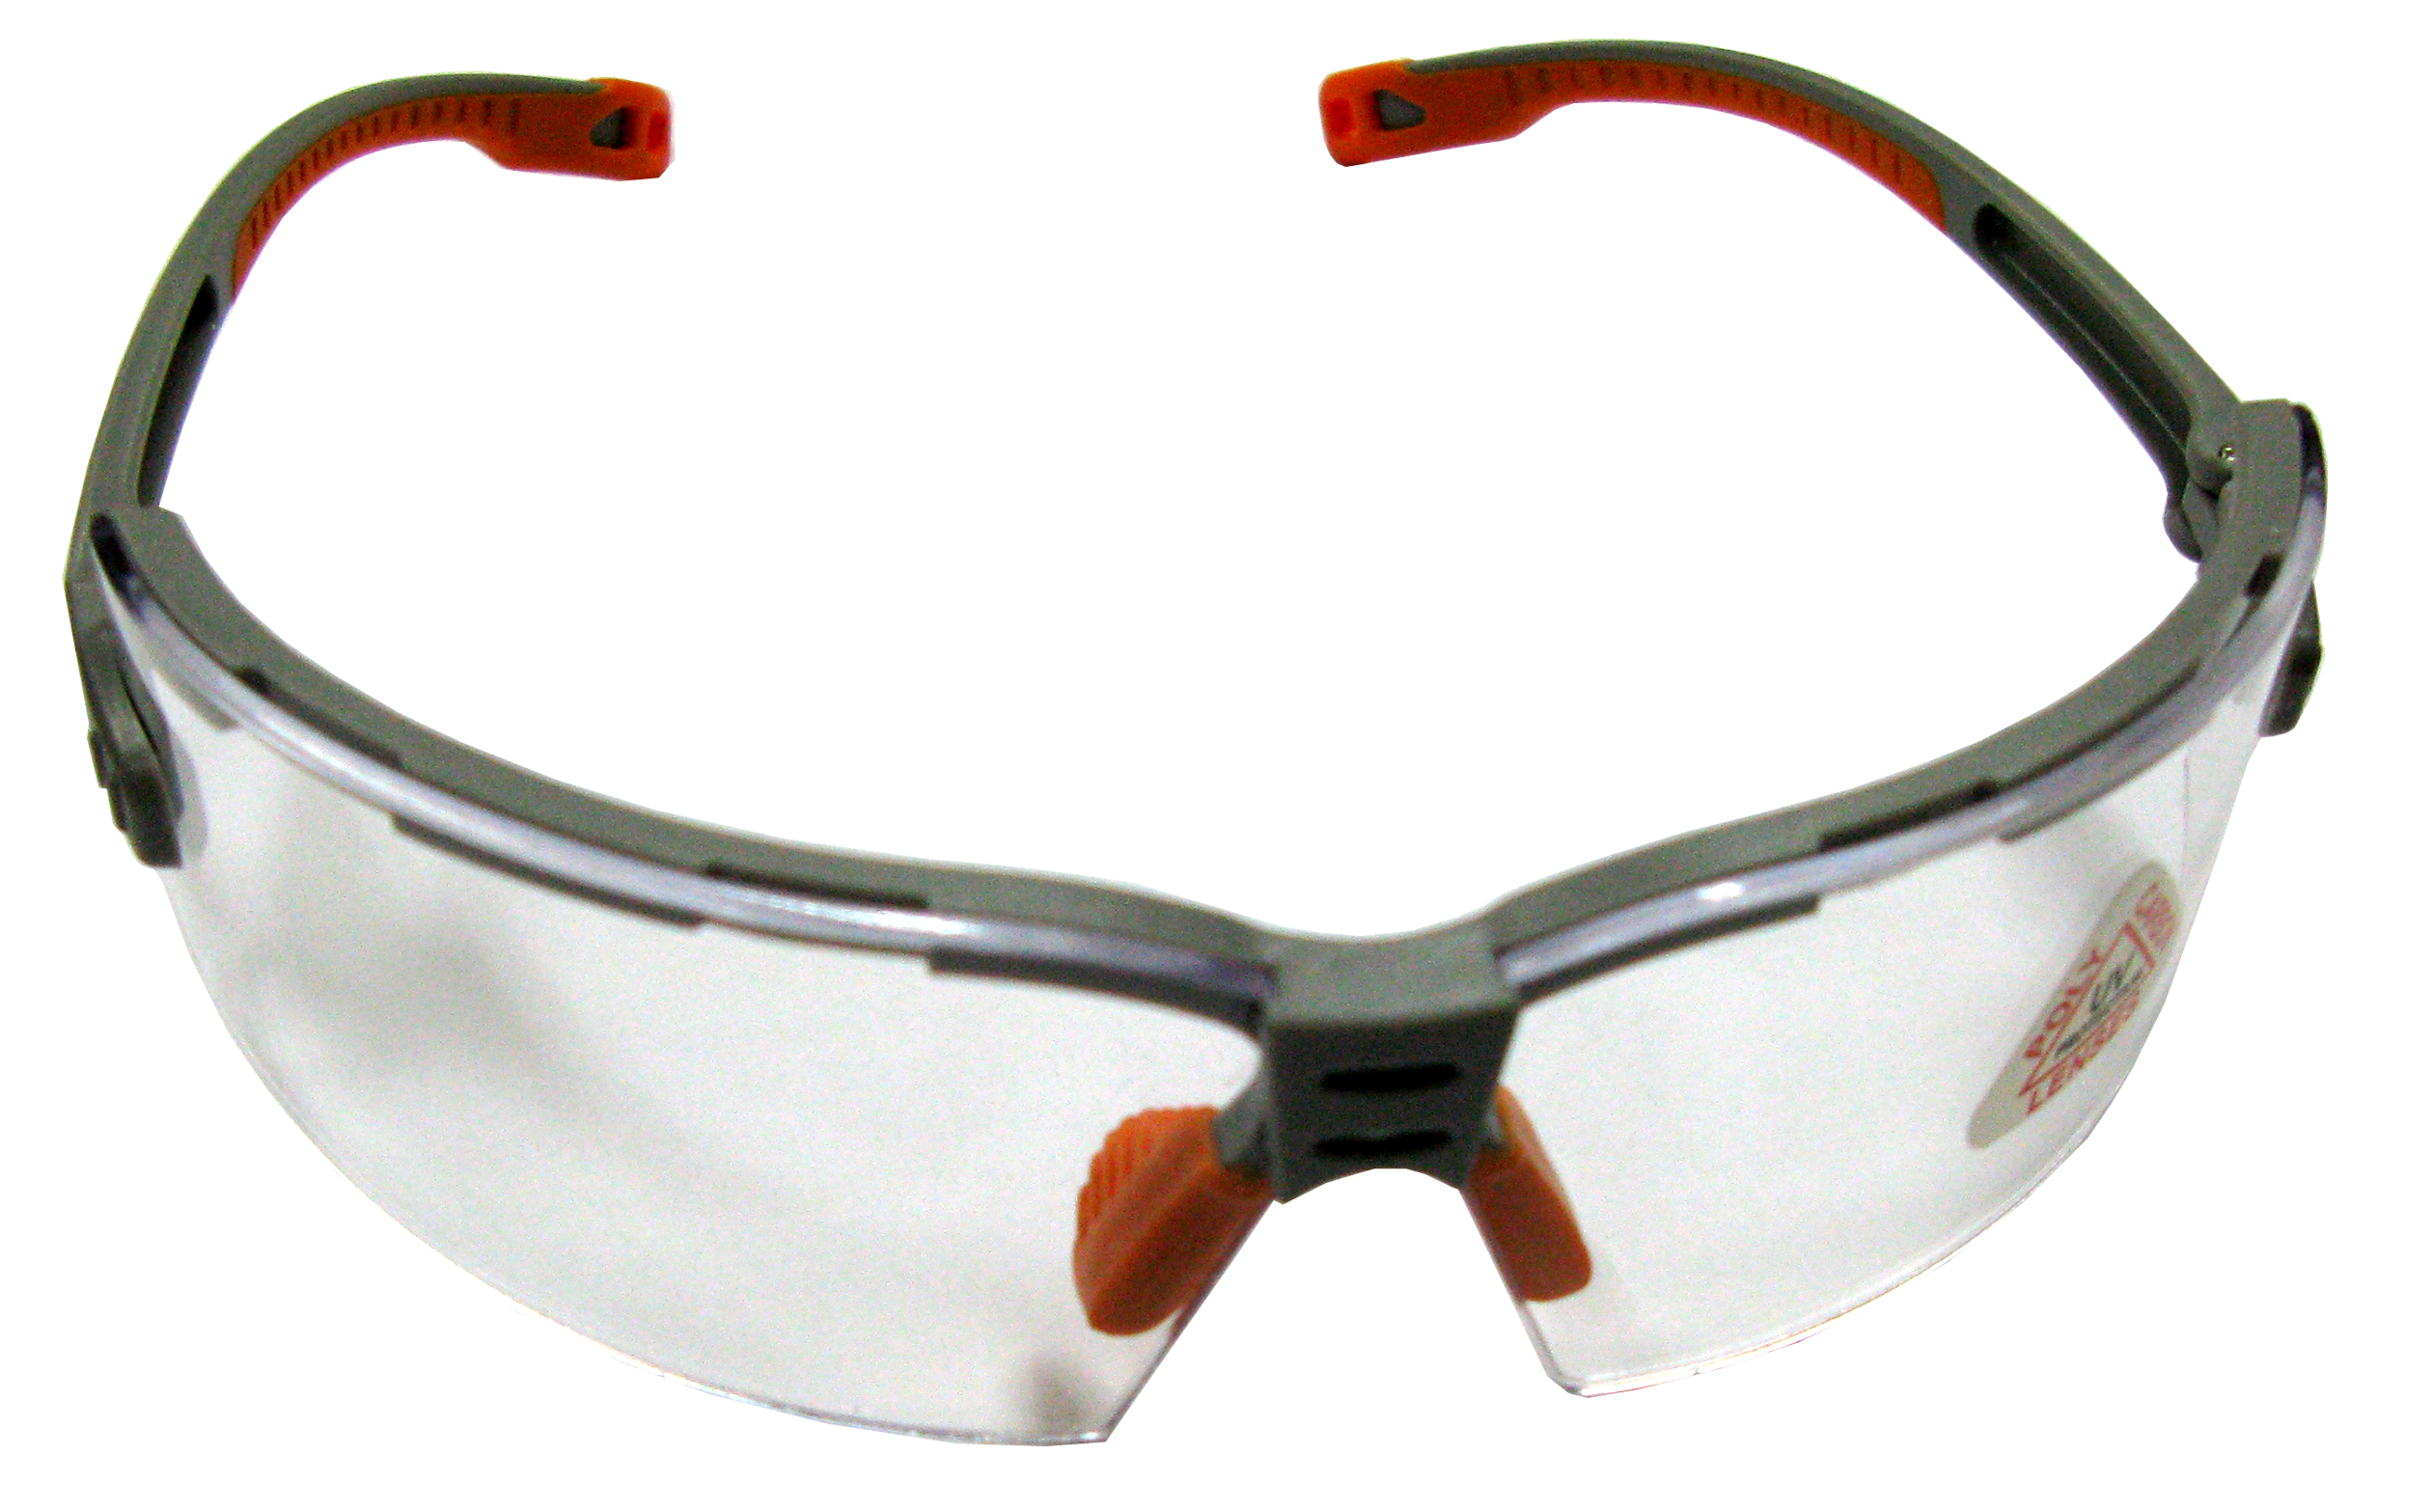  200 Grey Orange Frame Clear Lens Safety Spectacles-Light, Resilient and Durable protective eyewear, Scratch resistance